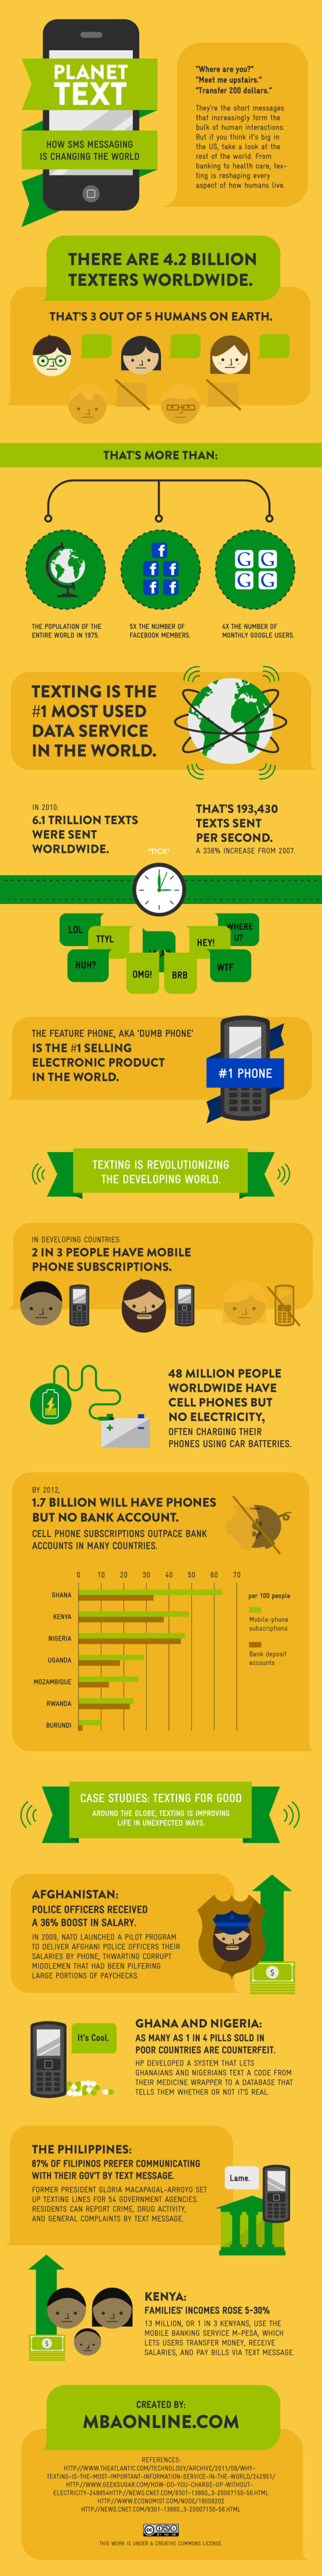 How SMS Messaging Is Changing Our World